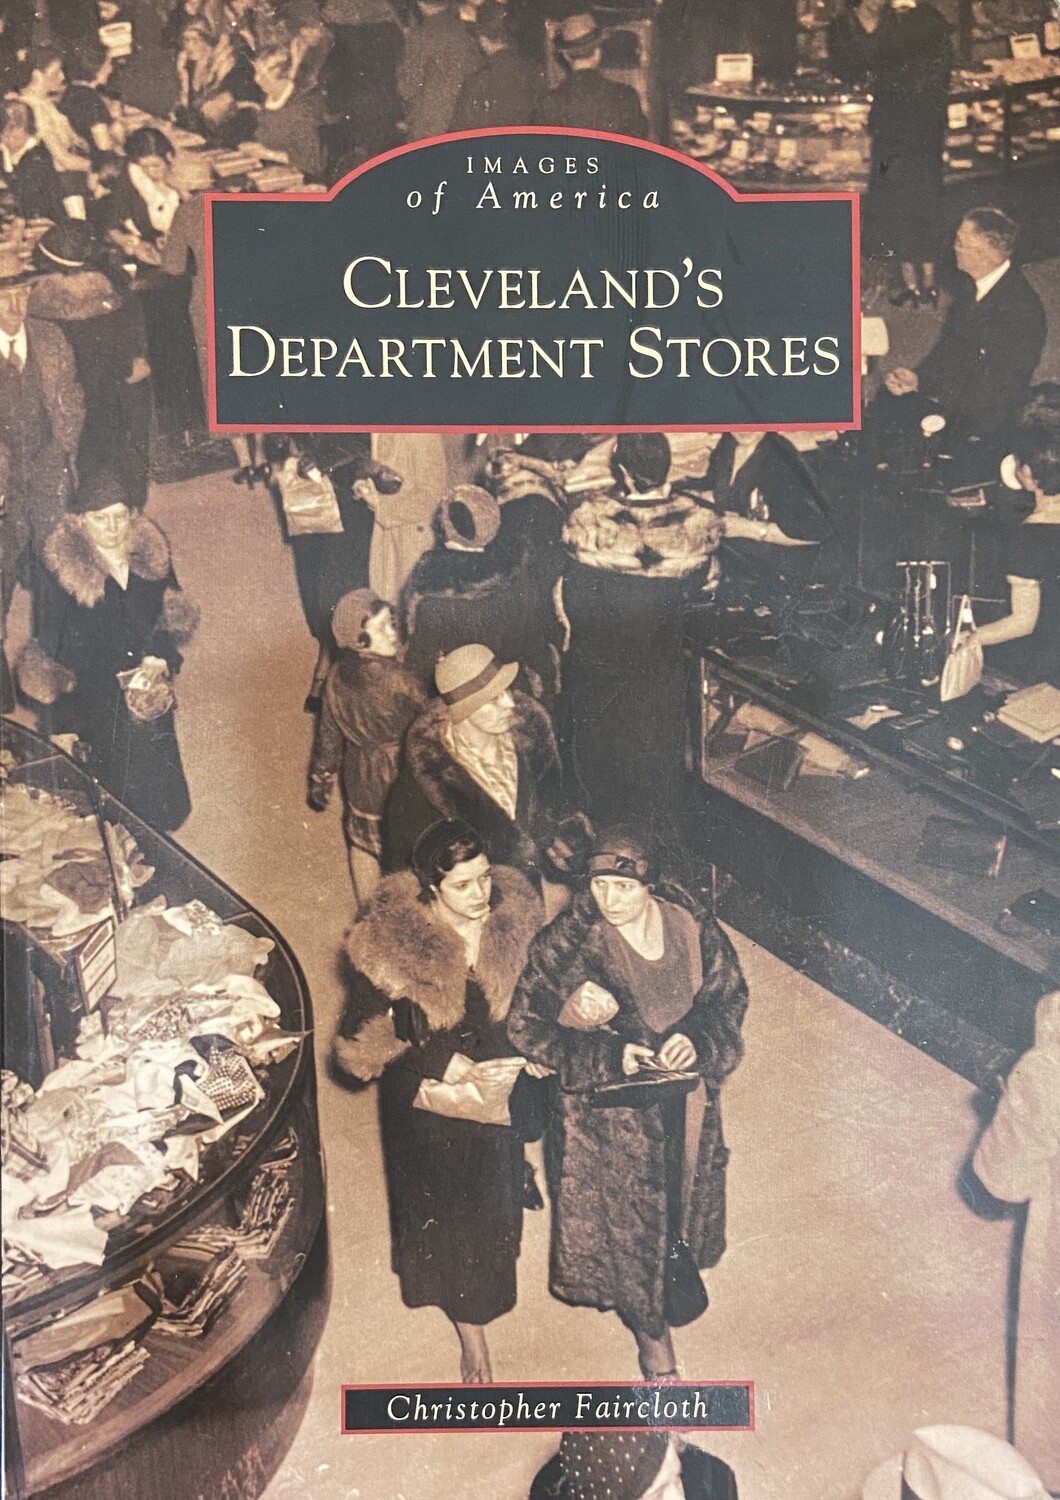 Cleveland’s Department Stores